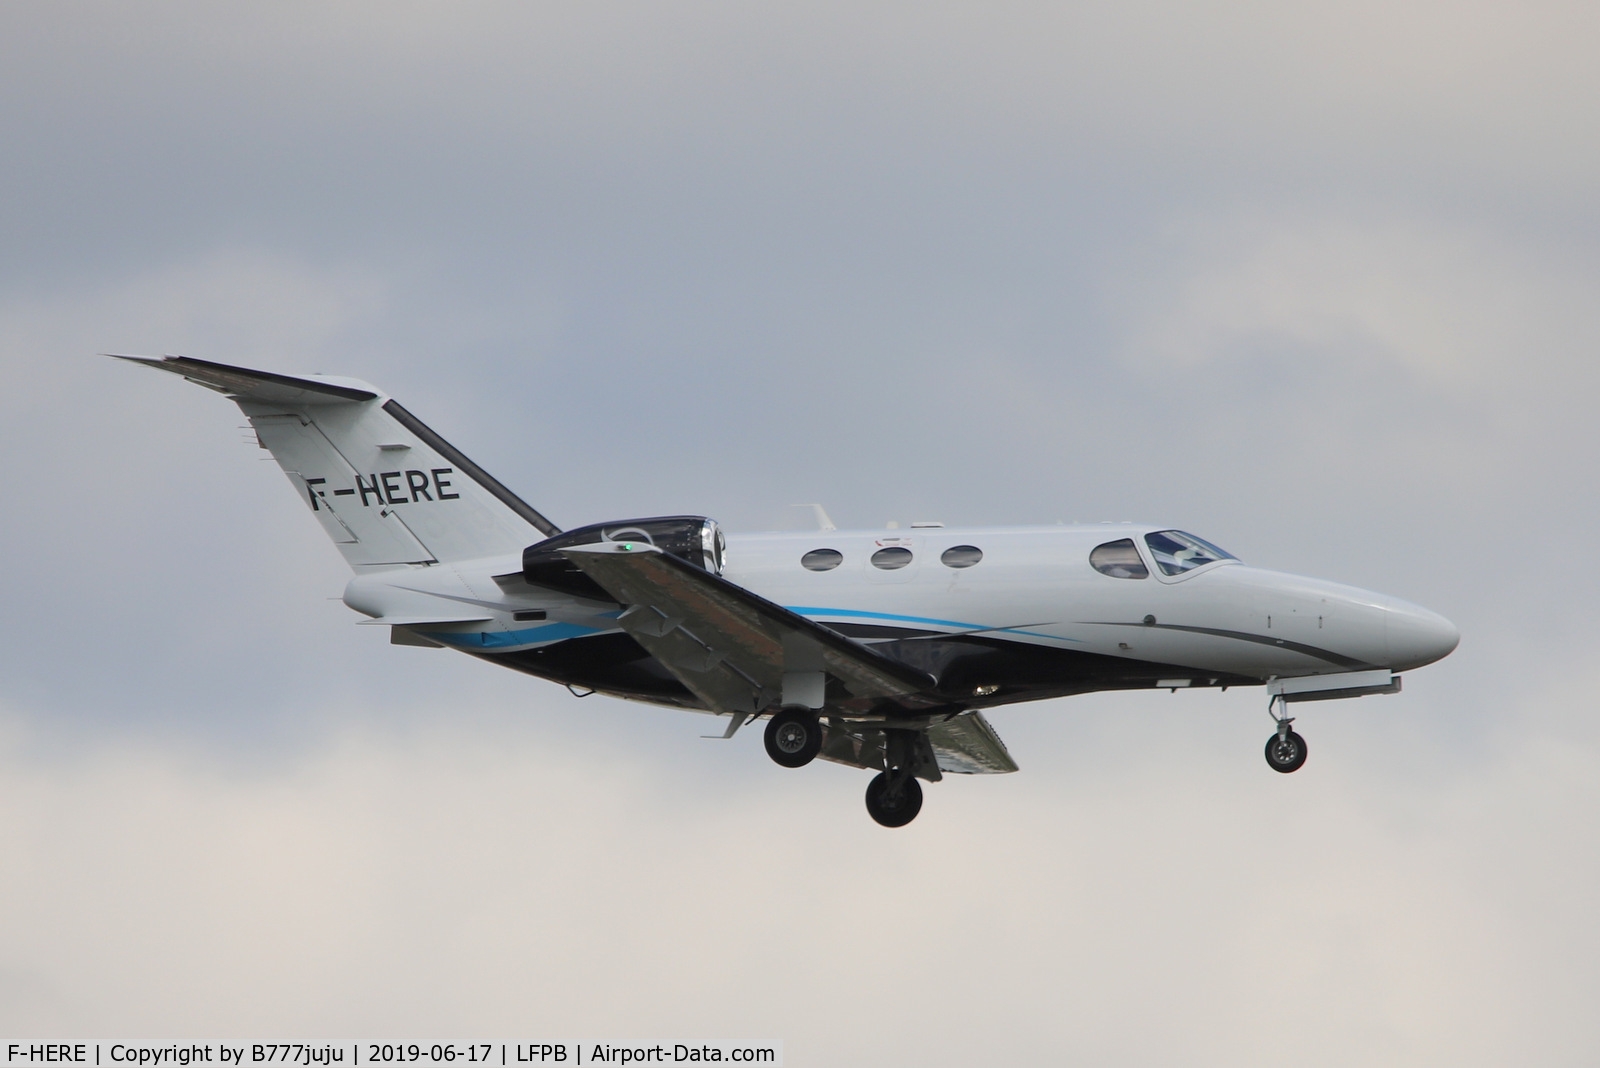 F-HERE, 2009 Cessna 510 Citation Mustang Citation Mustang C/N 510-0194, at Le Bourget